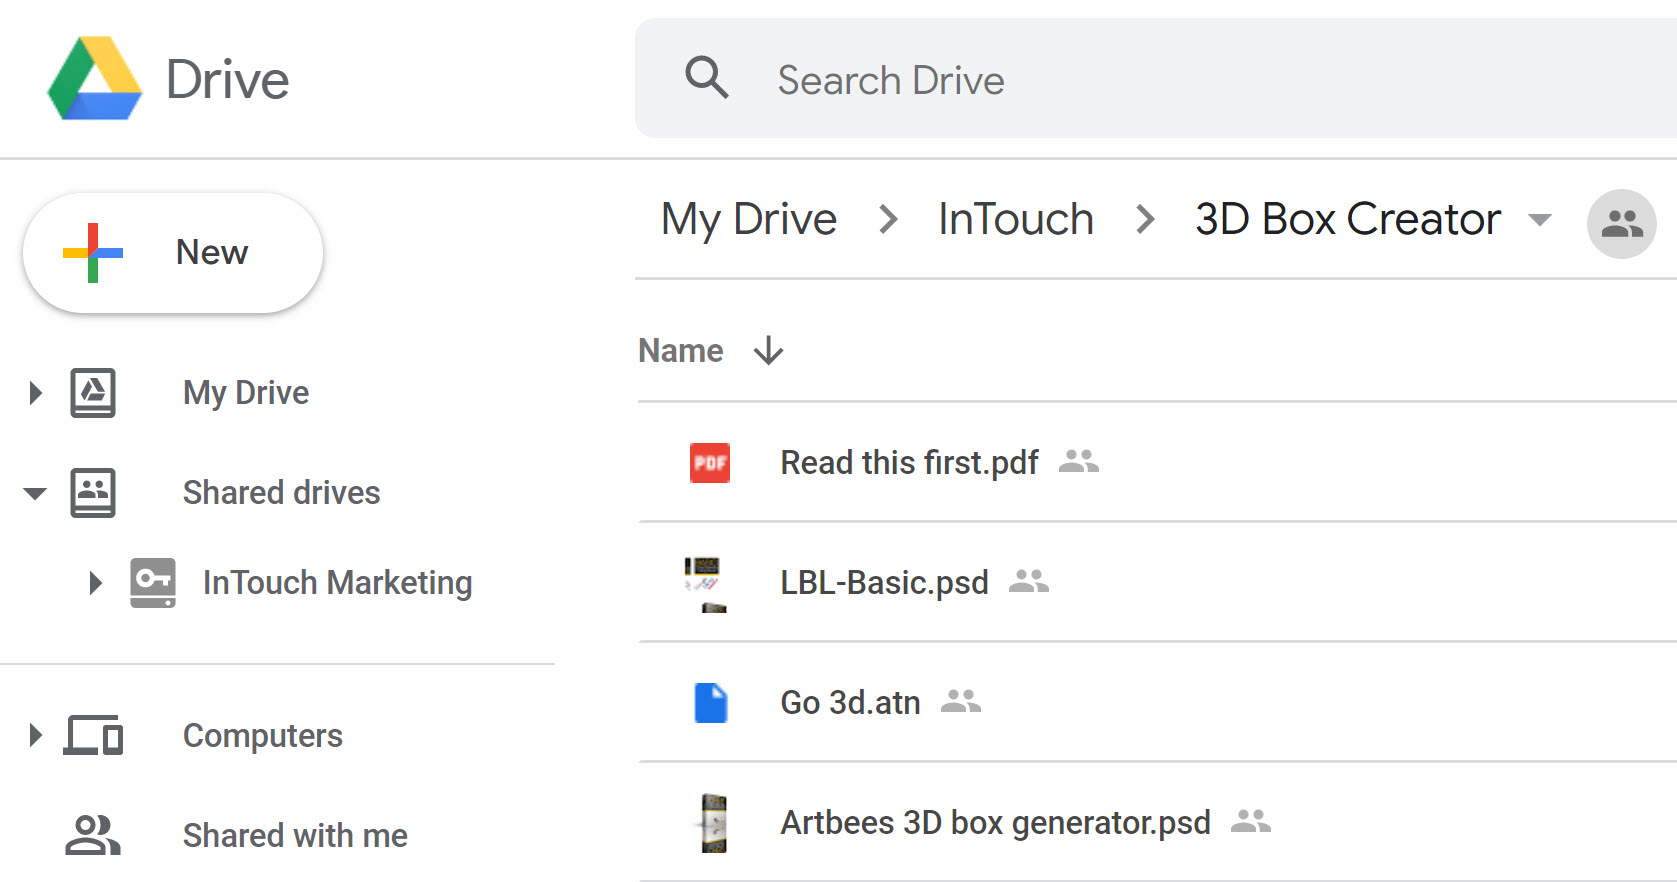 Can You Move Files and Folders From Google Drive to Google Shared Drive?